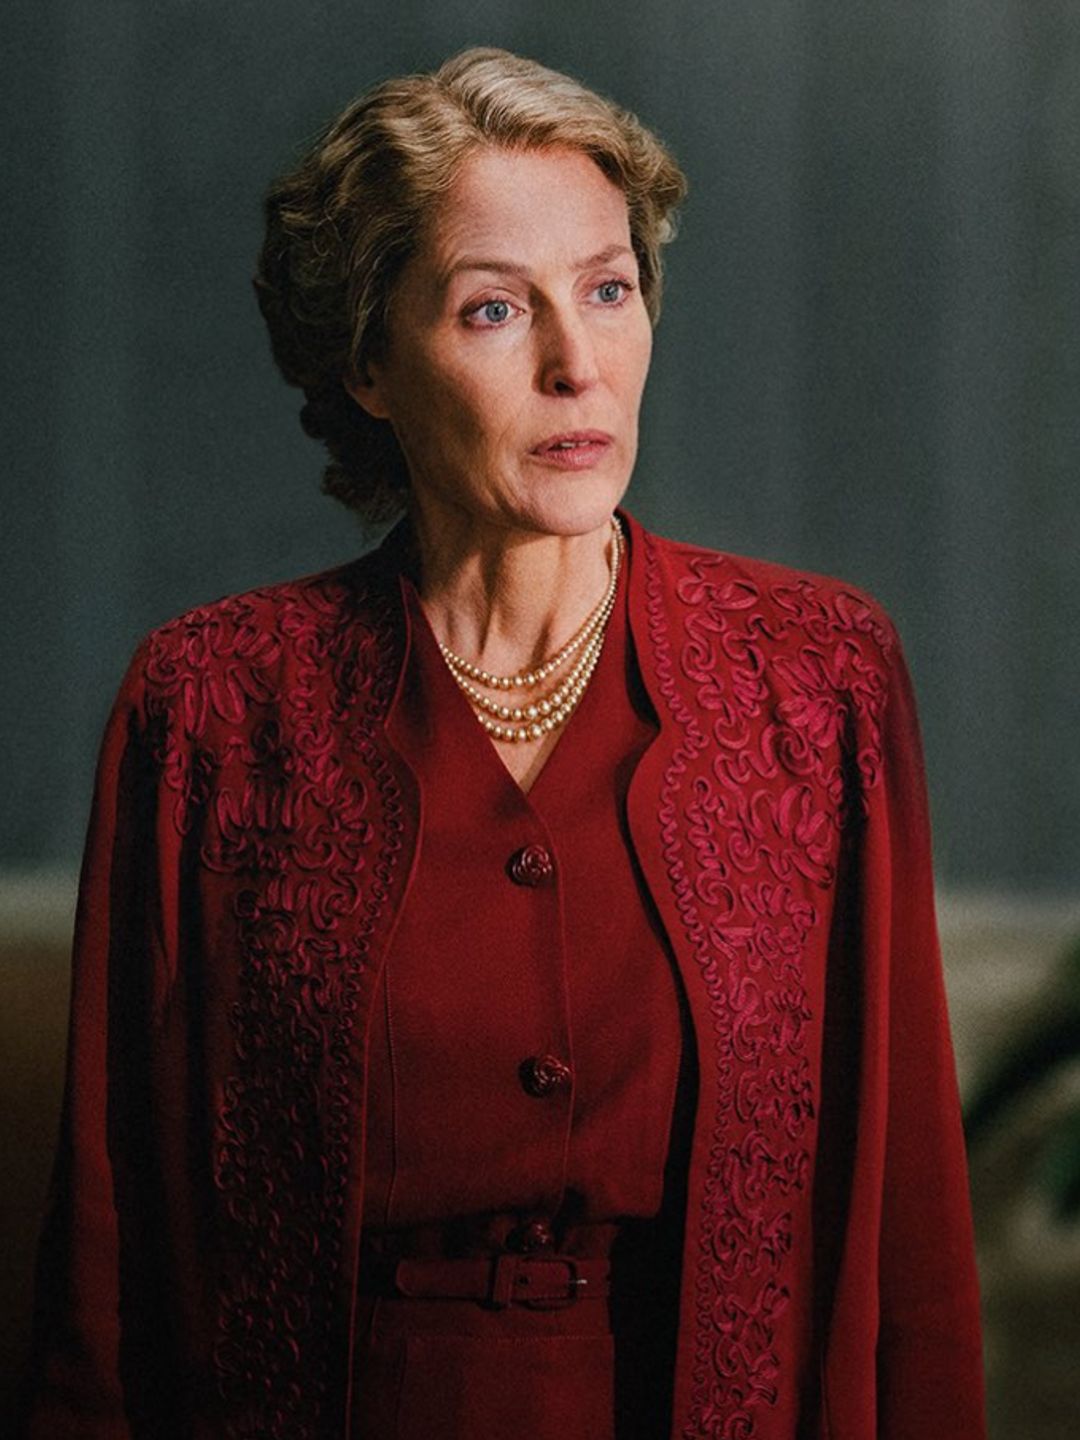 Gillian Anderson playing Eleanor Roosevelt in 'The First Lady'